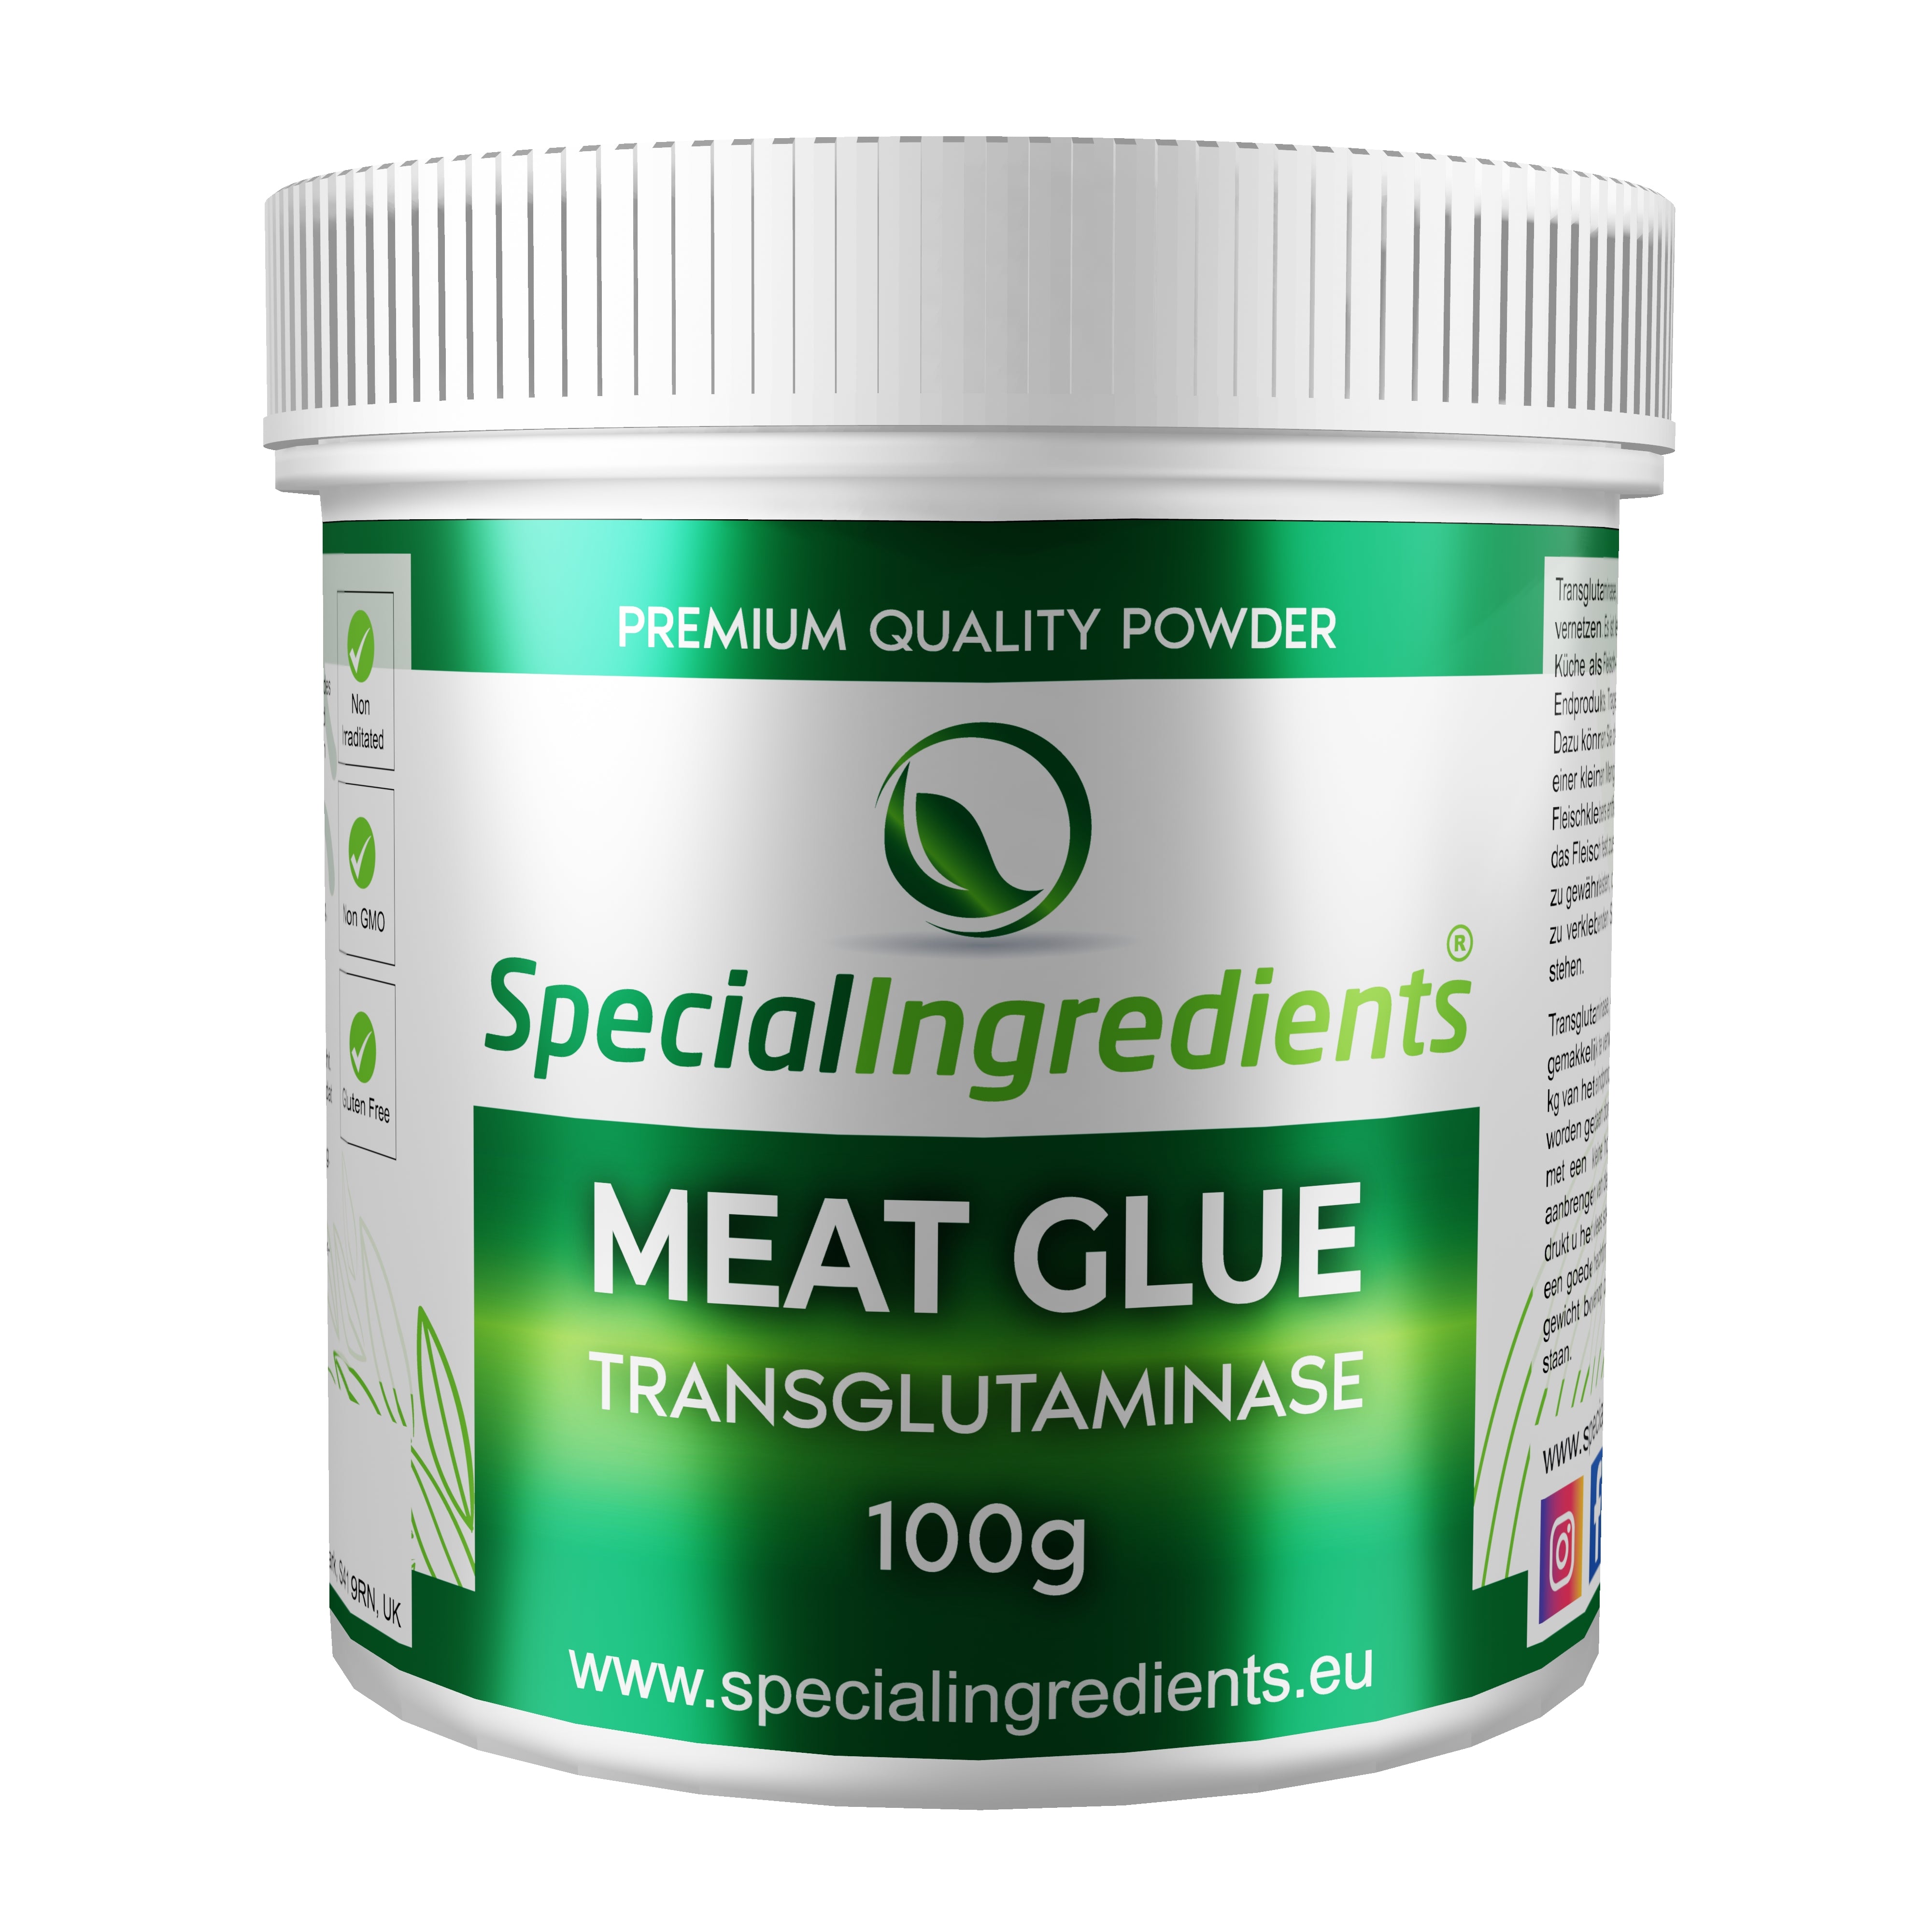 Transglutaminase (Meat Glue): What Is It and Is It Safe?